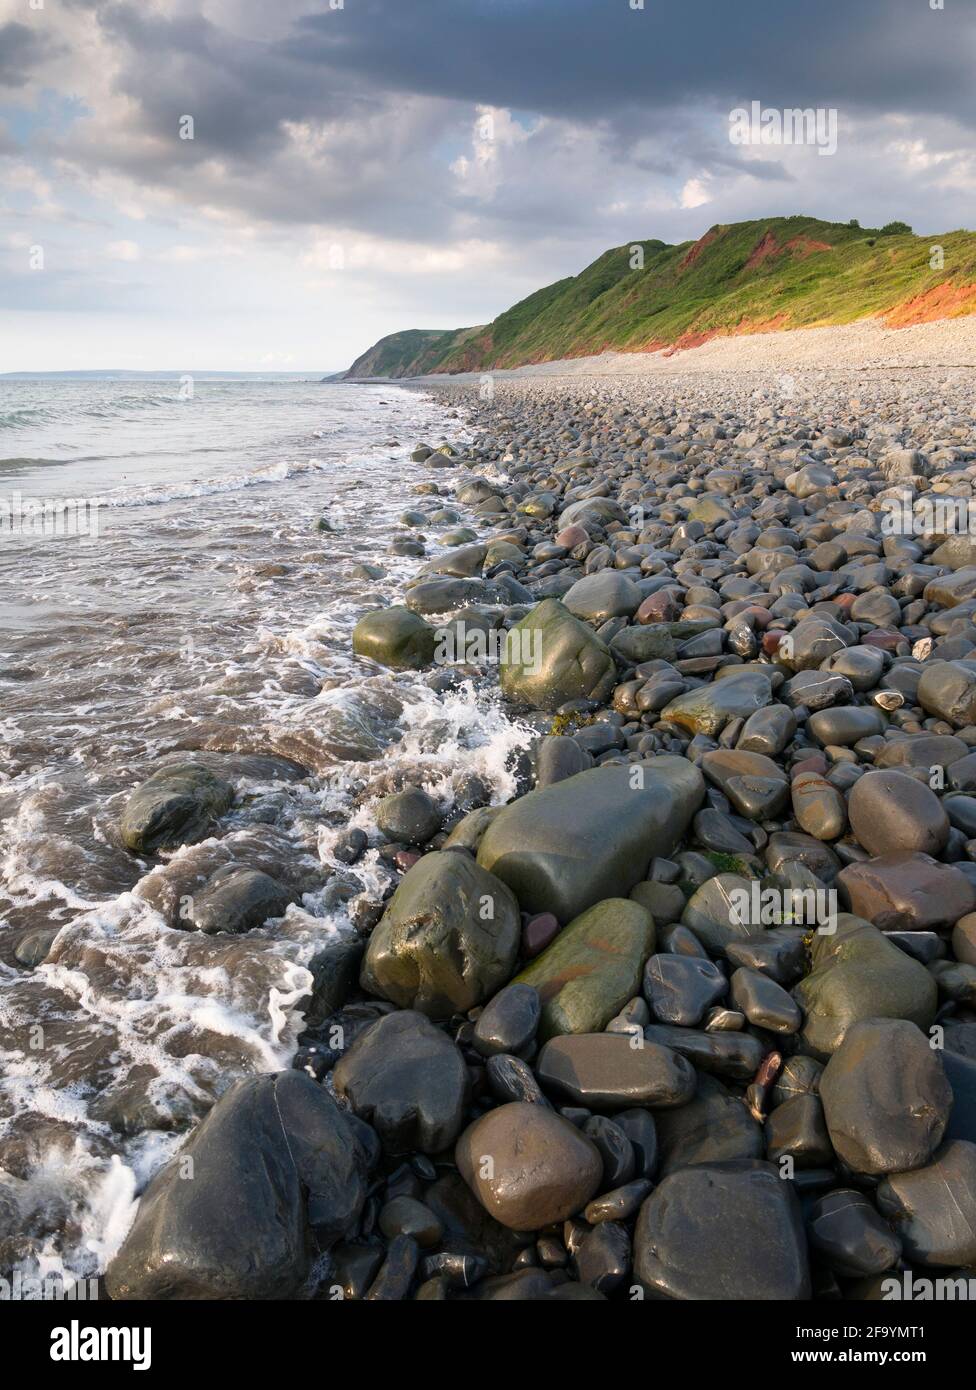 The beach and Babbacombe Cliff at Peppercombe on the North Devon coast, England. Stock Photo